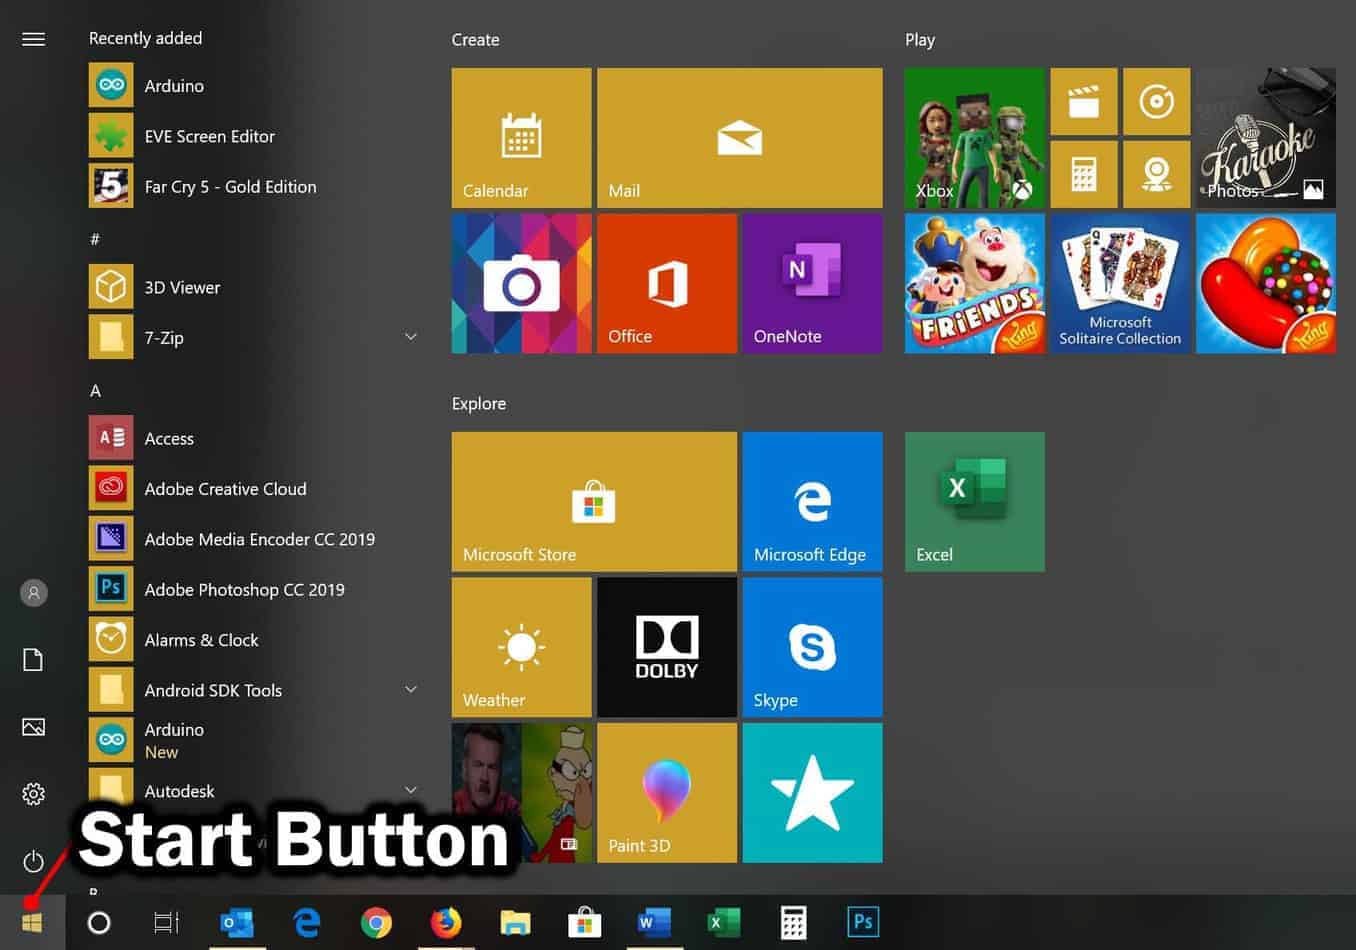 Open the Start menu by clicking on the Windows icon in the bottom left corner of the screen.
Click on Settings to open the Windows Settings menu.